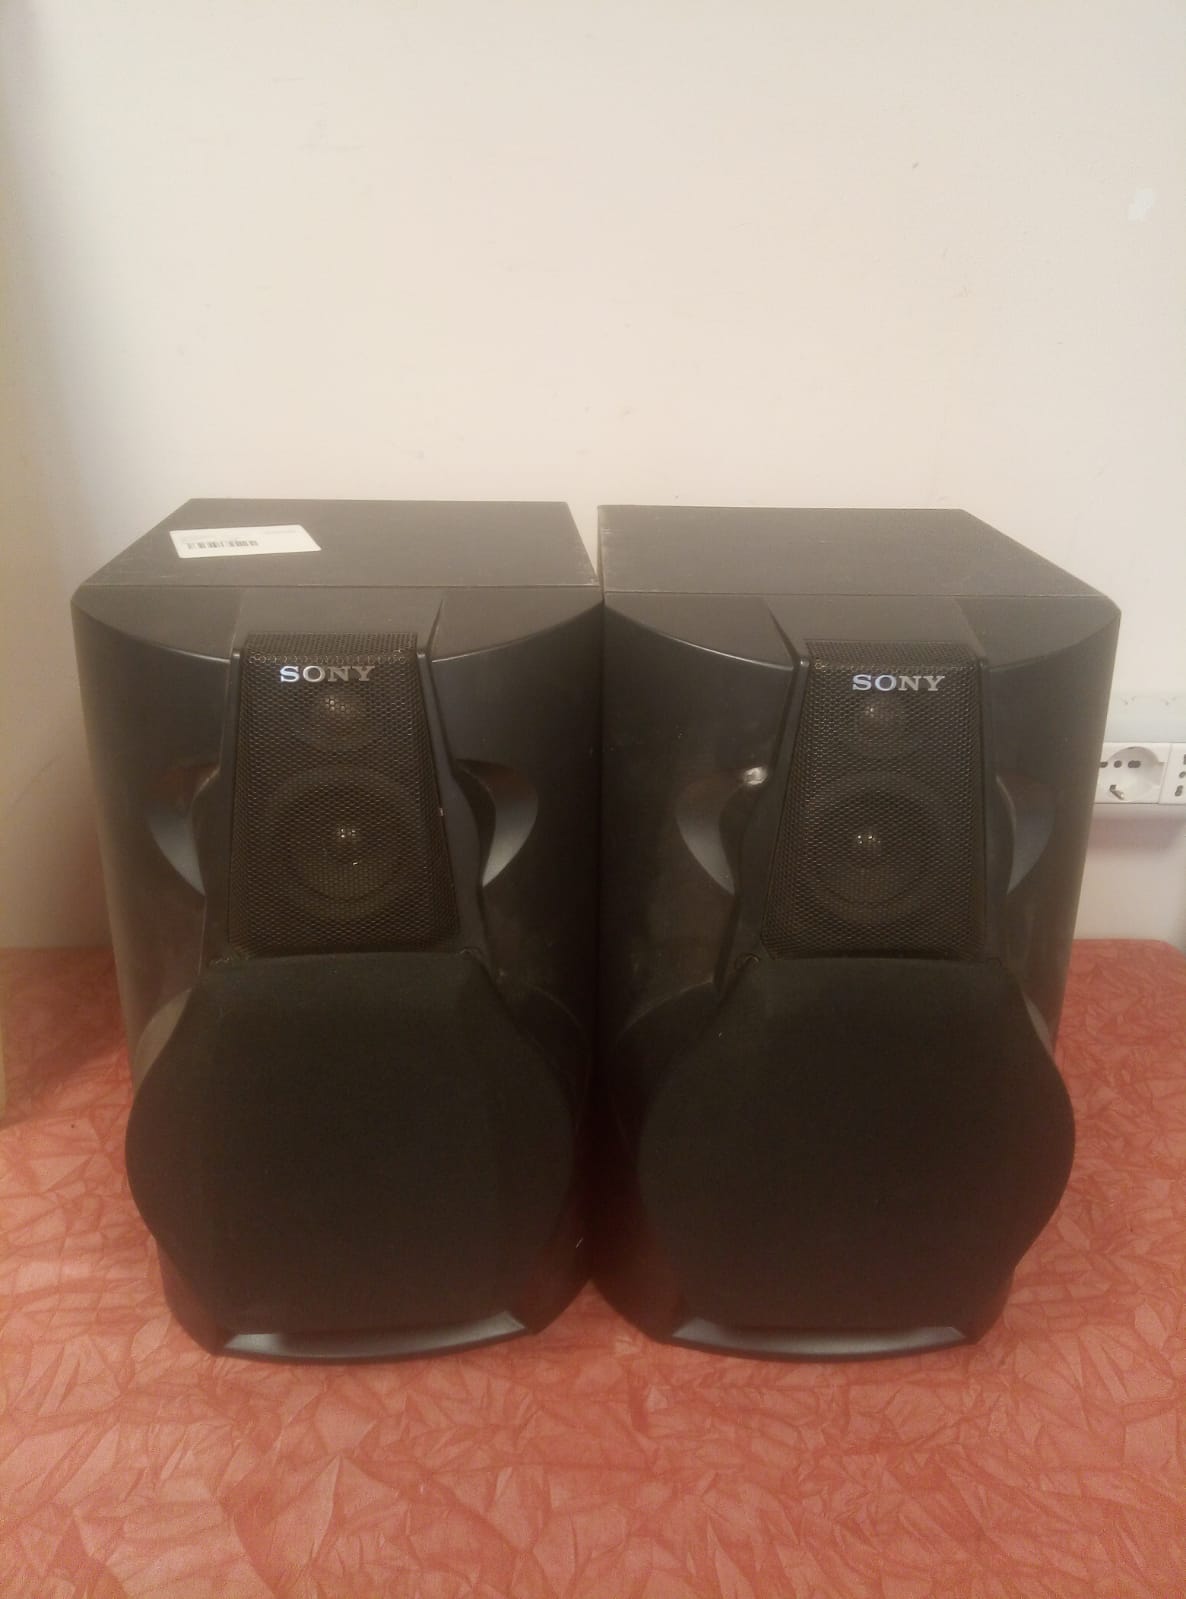 COPPIA CASSE SONY SS-L100V